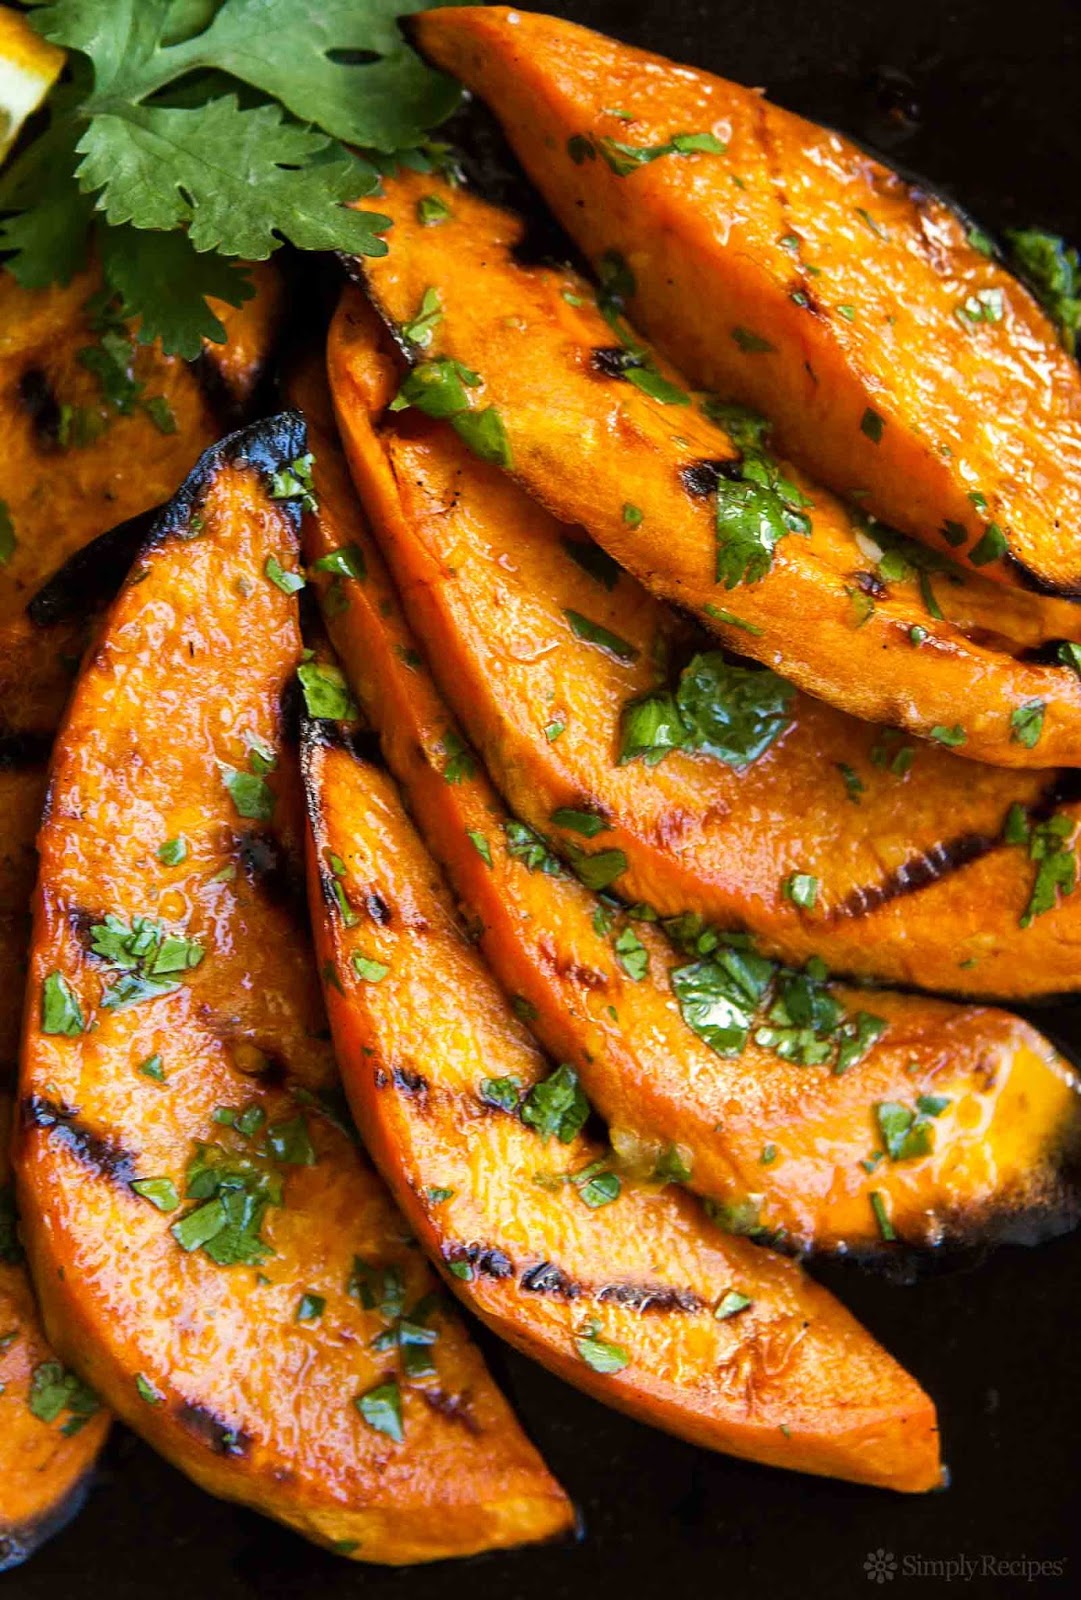 Make Summer Grilling Fun with Vegetarian Recipes